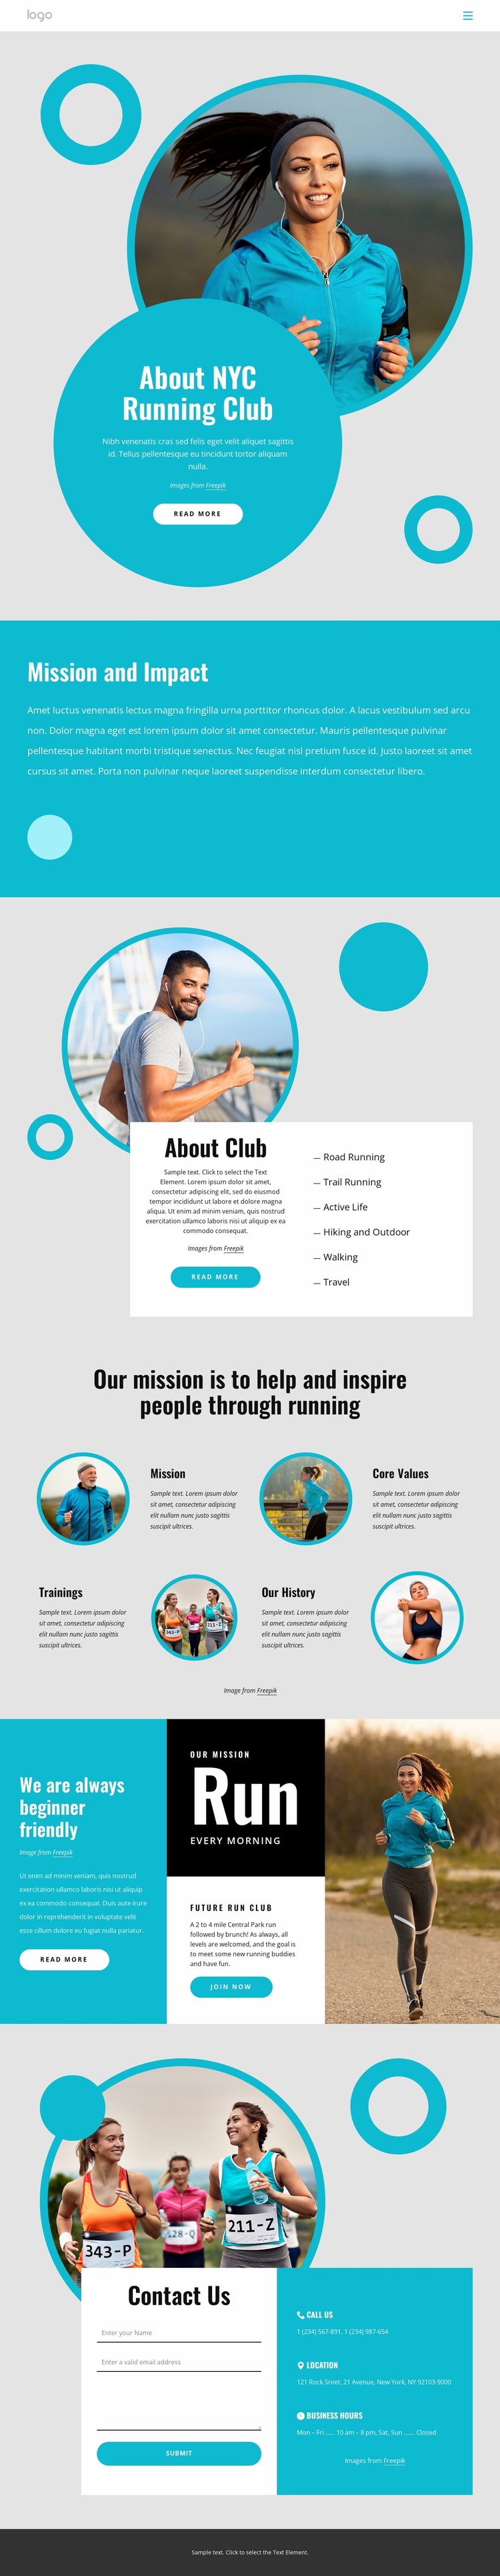 About NYC running club eCommerce Template